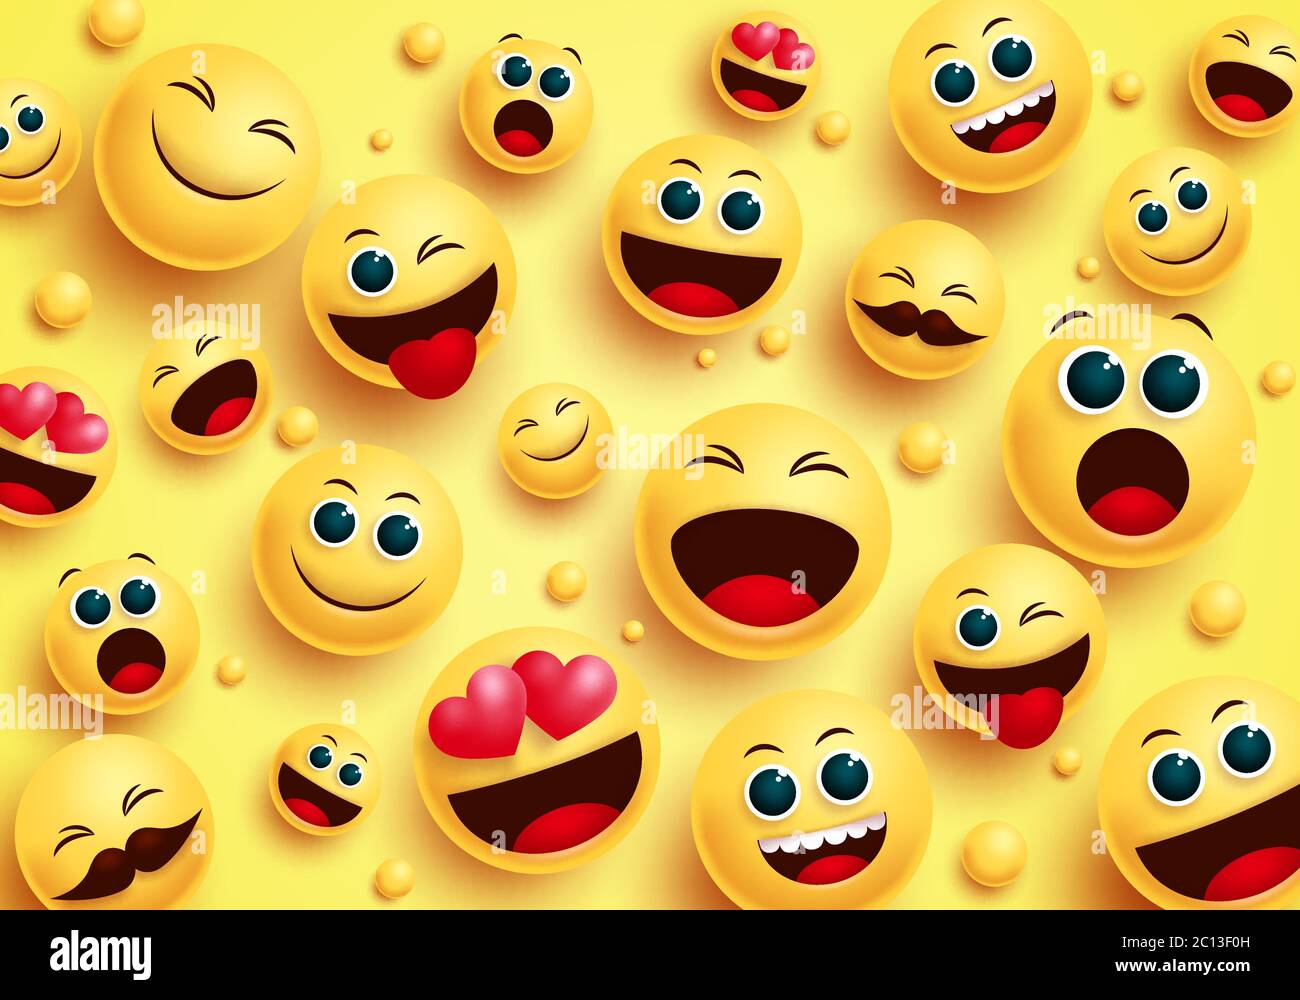 Smiley emojis in yellow background vector concept. Smileys emoji avatar character in top view with different facial expressions like in love, happy. Stock Vector